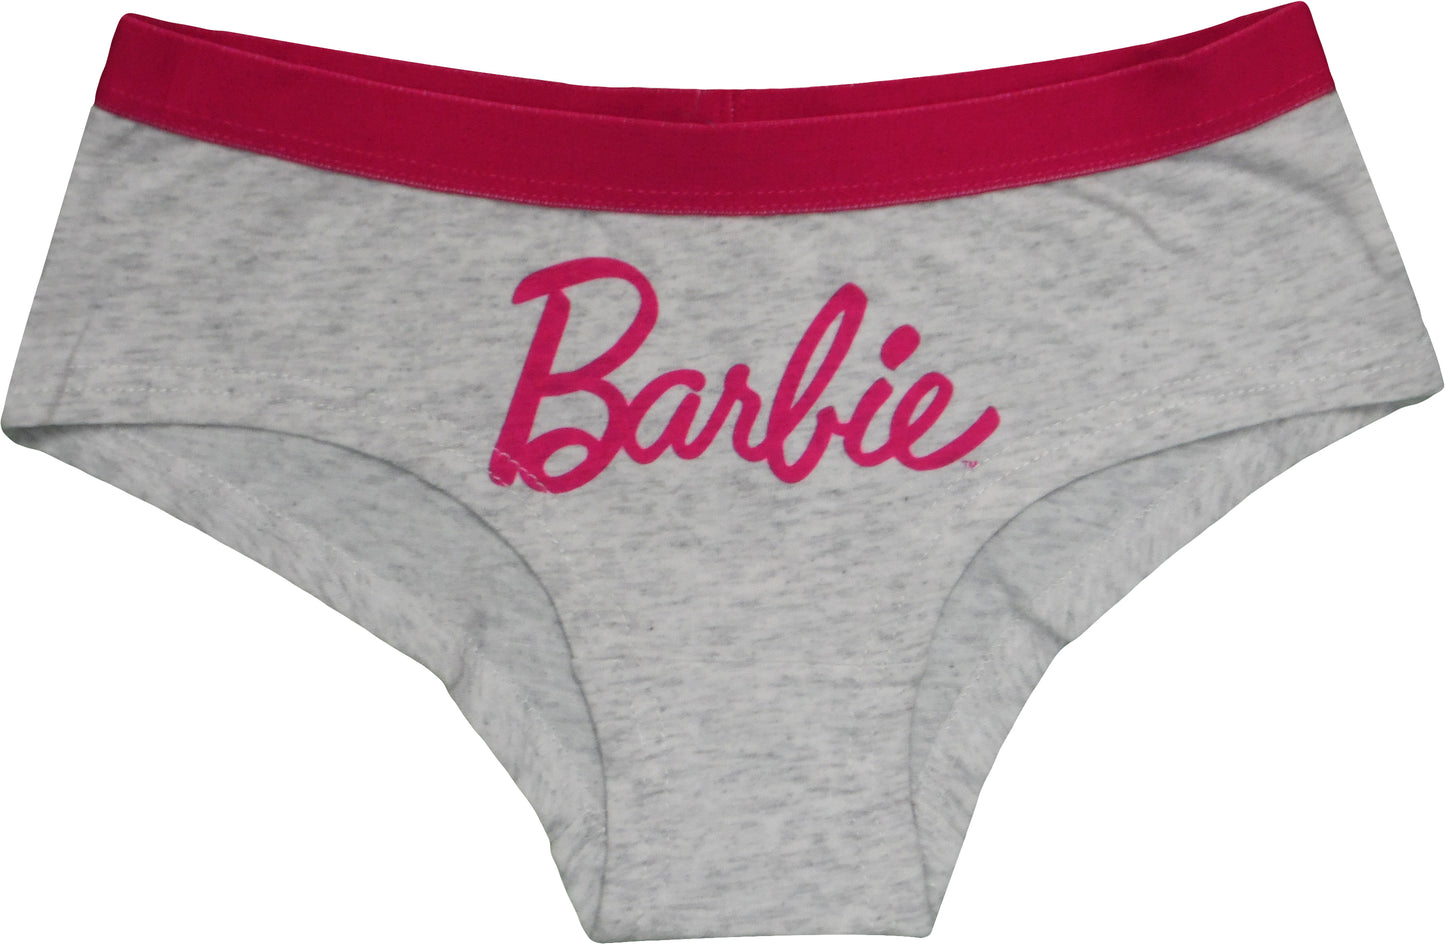 Barbie Cotton Underwear Knickers Pack of 2 for Girls – Shoppe 'N